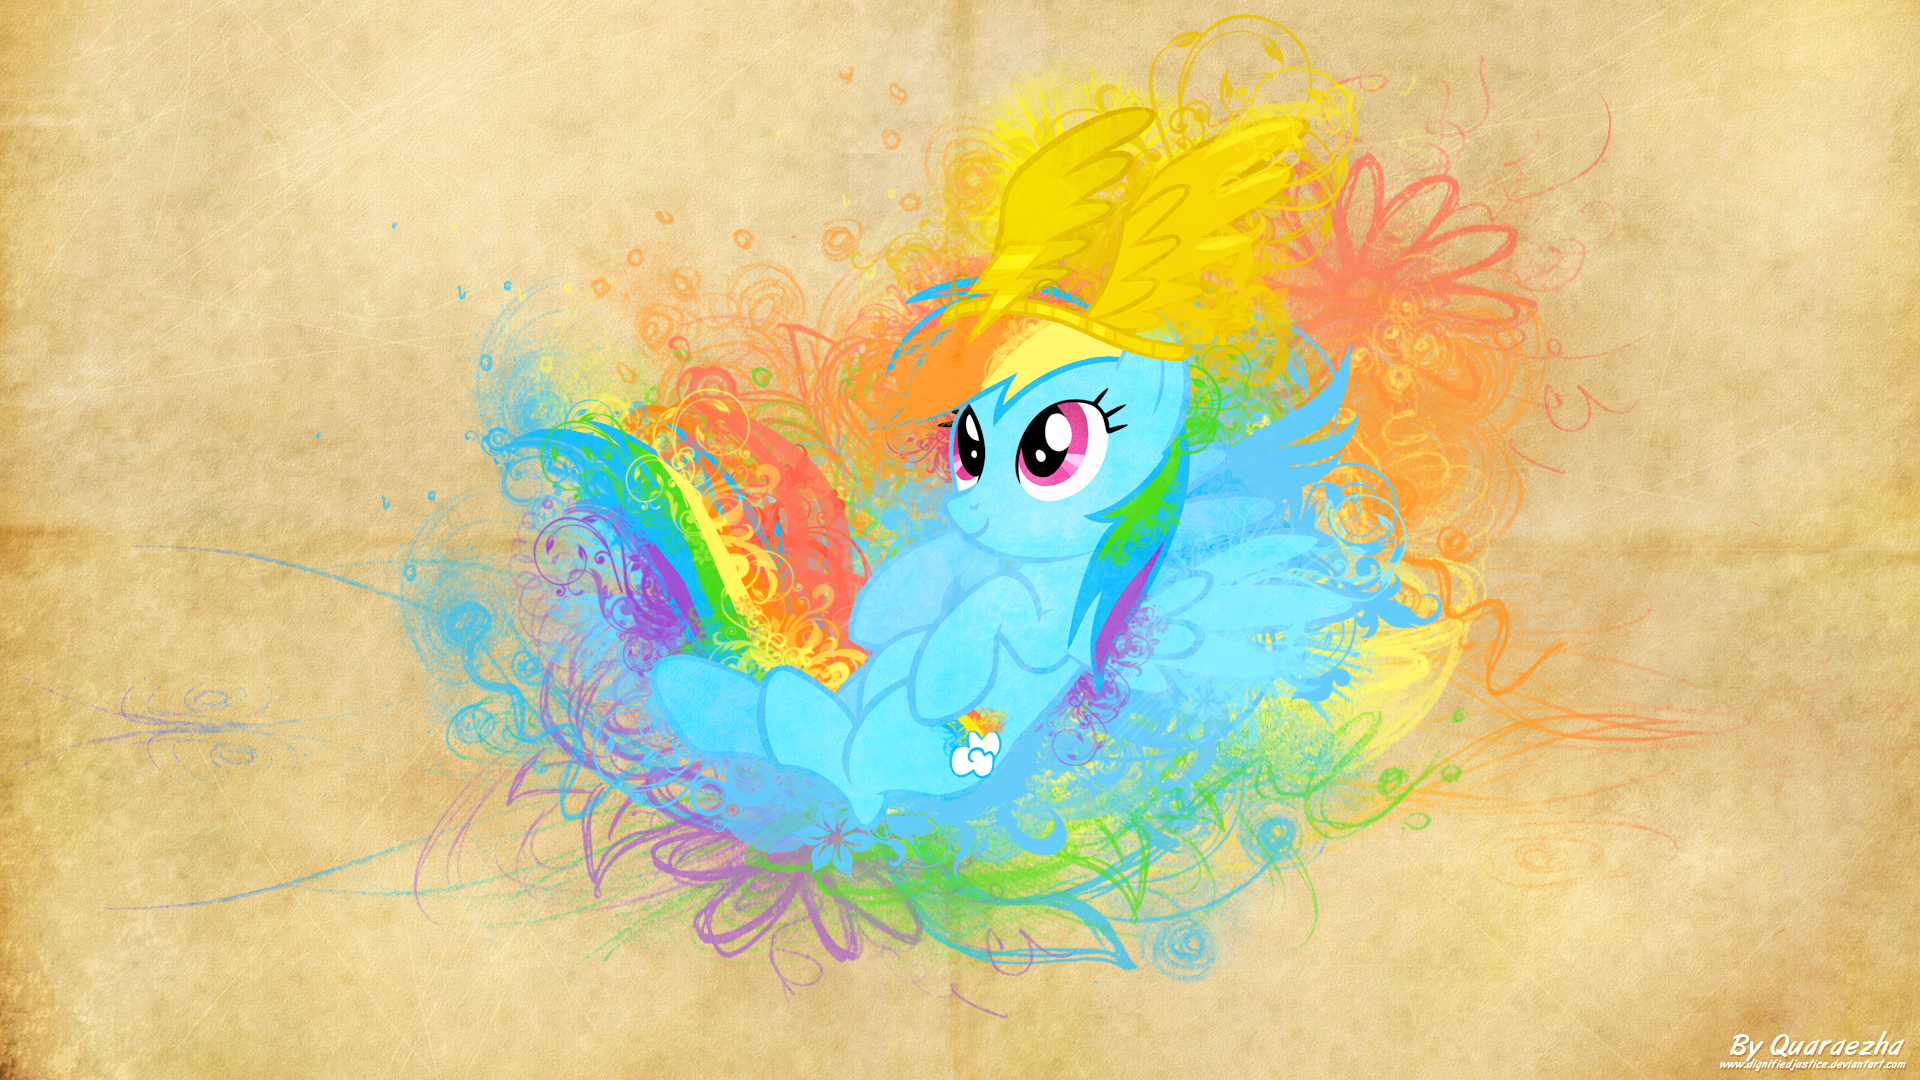 Rainbow Dash Parchment by dignifiedjustice